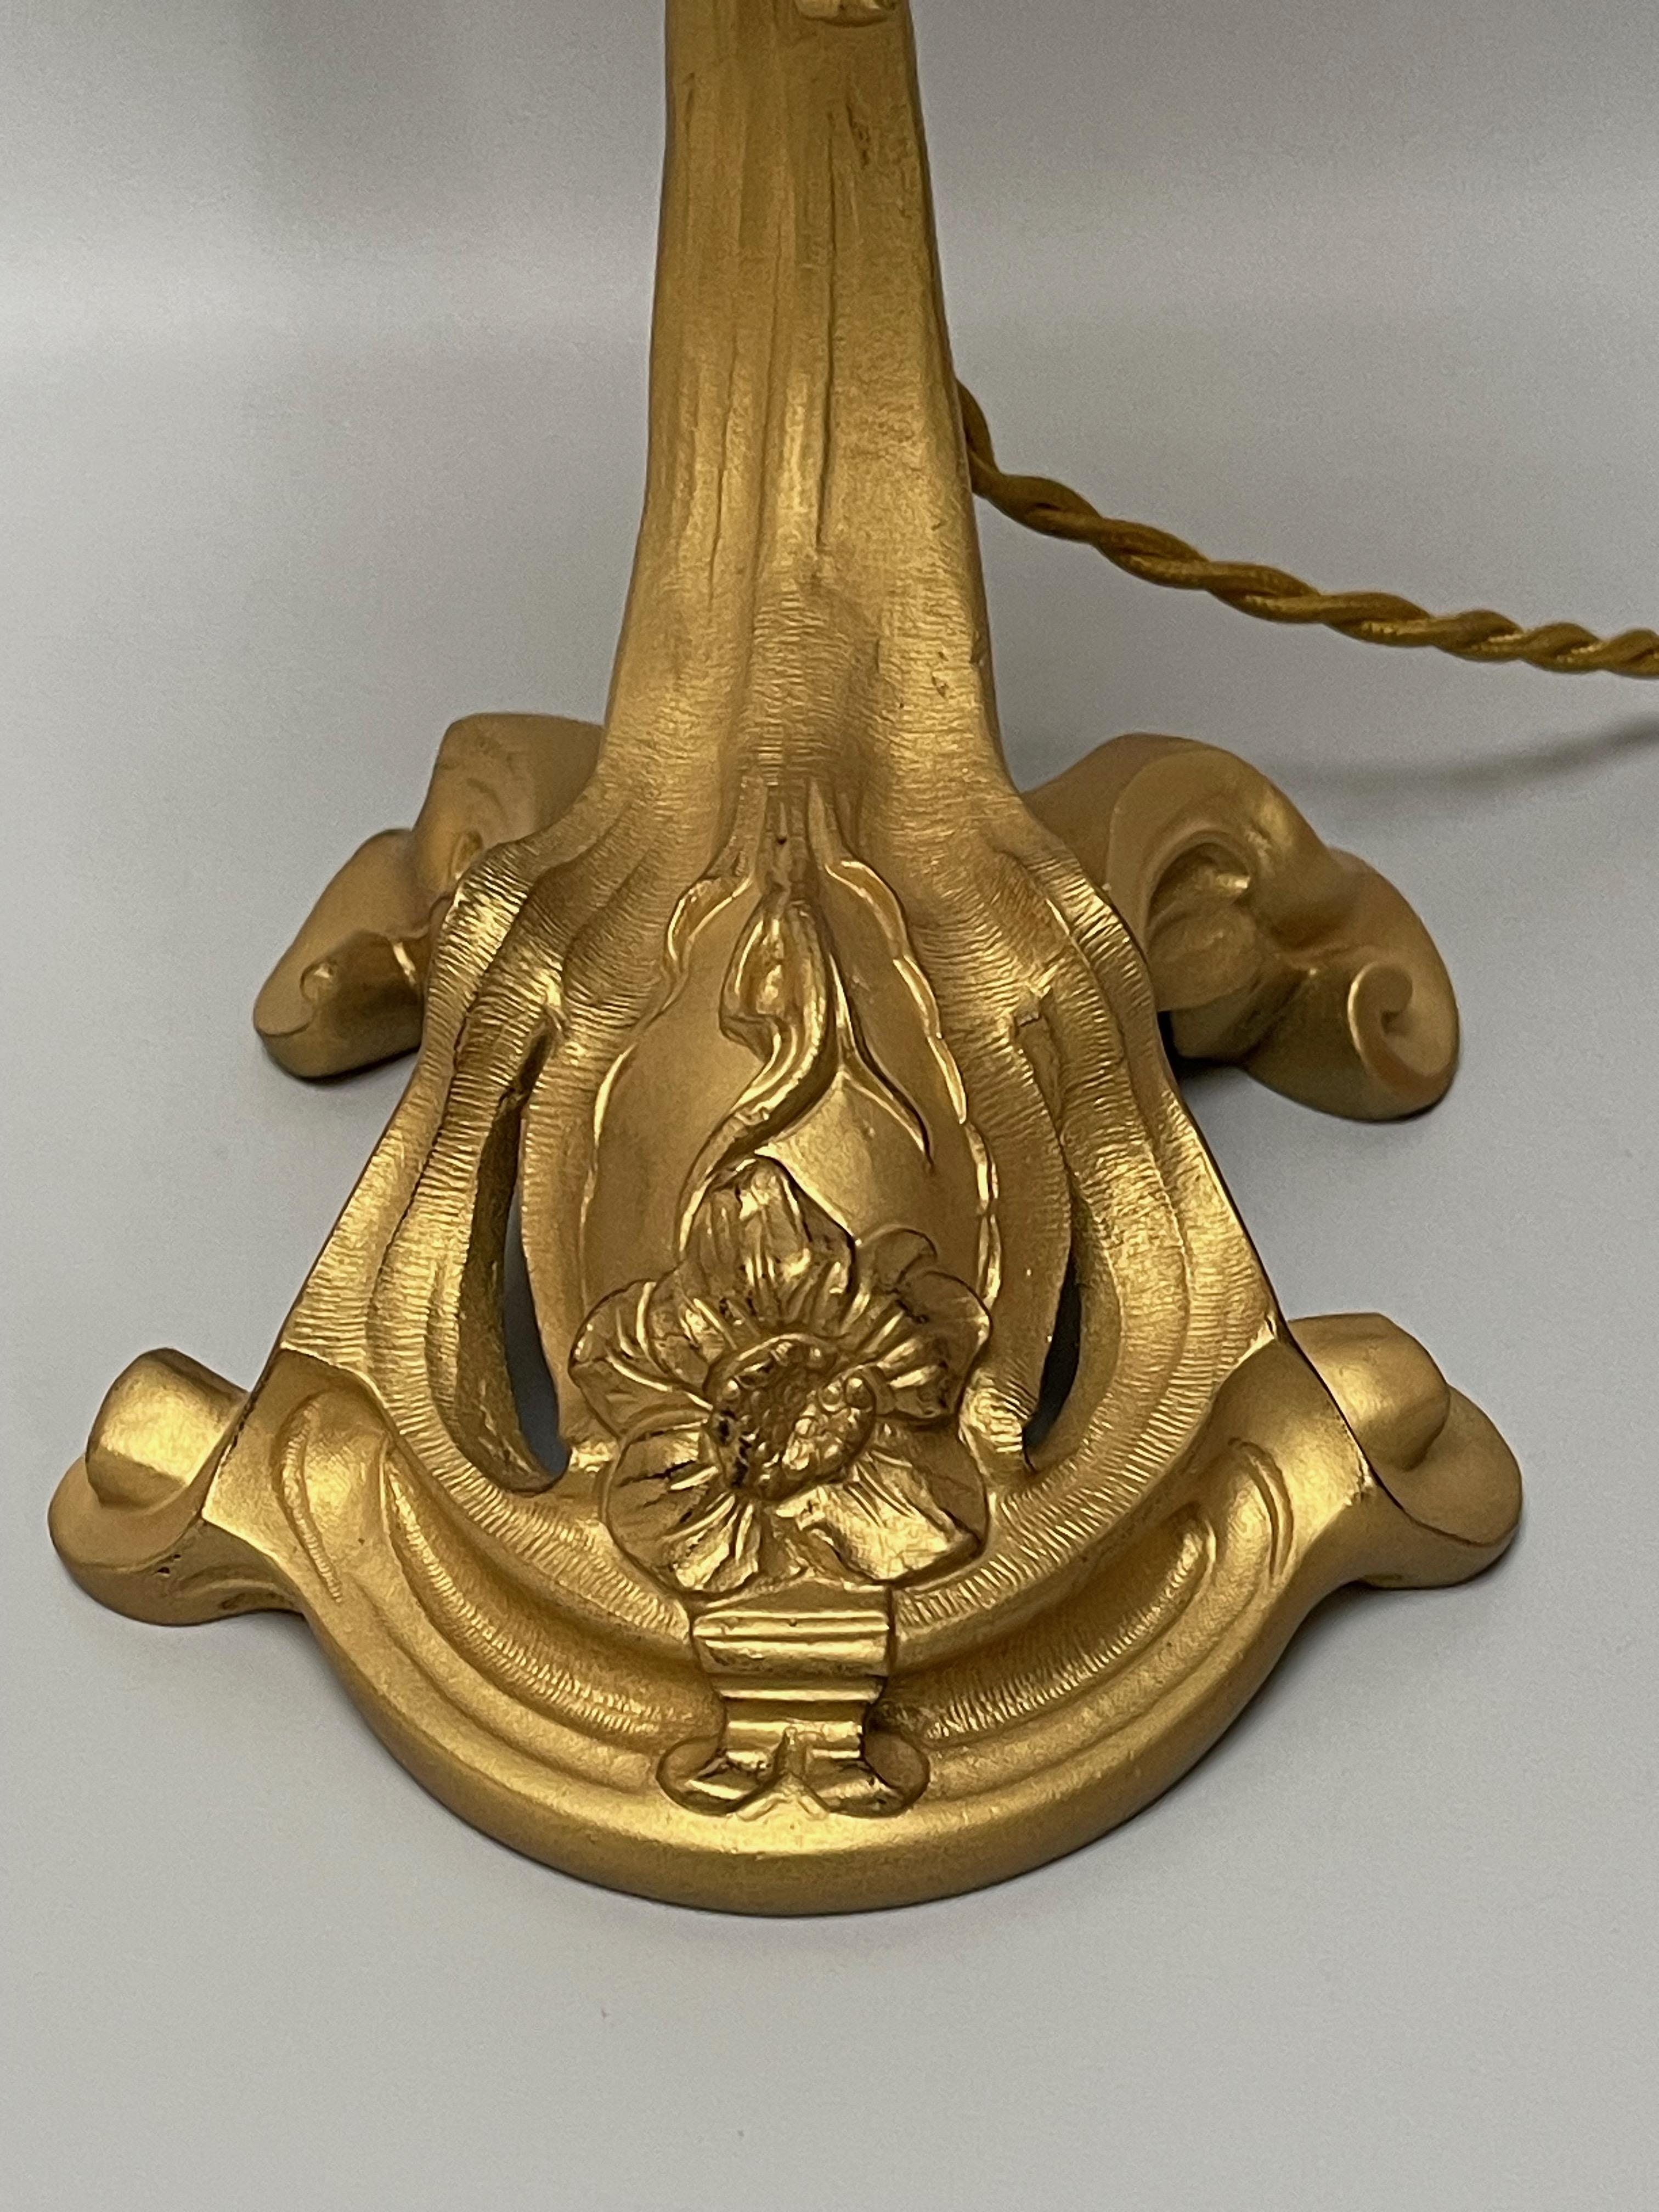 Gilt bronze lamp around 1900, probably by Majorelle executed by Victor Saglier. Stamped on the foot VS.
Glass paste tulip signed Daum Nancy.
Lamp electrified and in perfect condition.

Total height: 38.5 cm - 15.15 in
width: 15cm
depth: